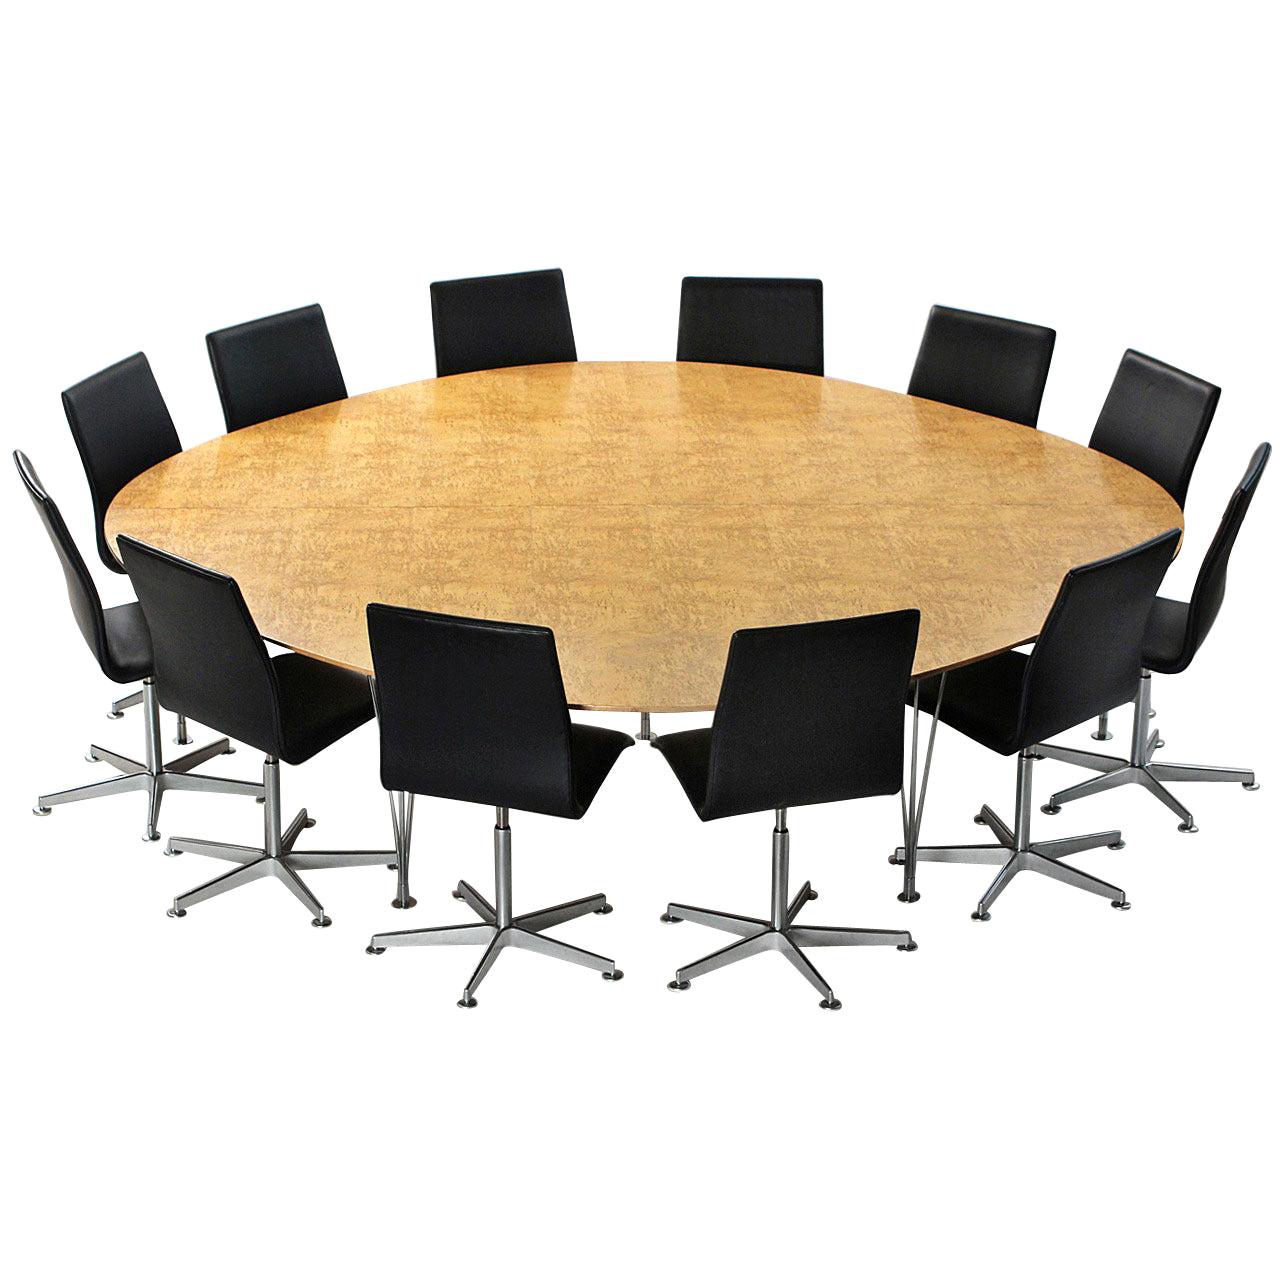 'Super Ellipse' Conference or Dining Table by Piet Hein For Sale